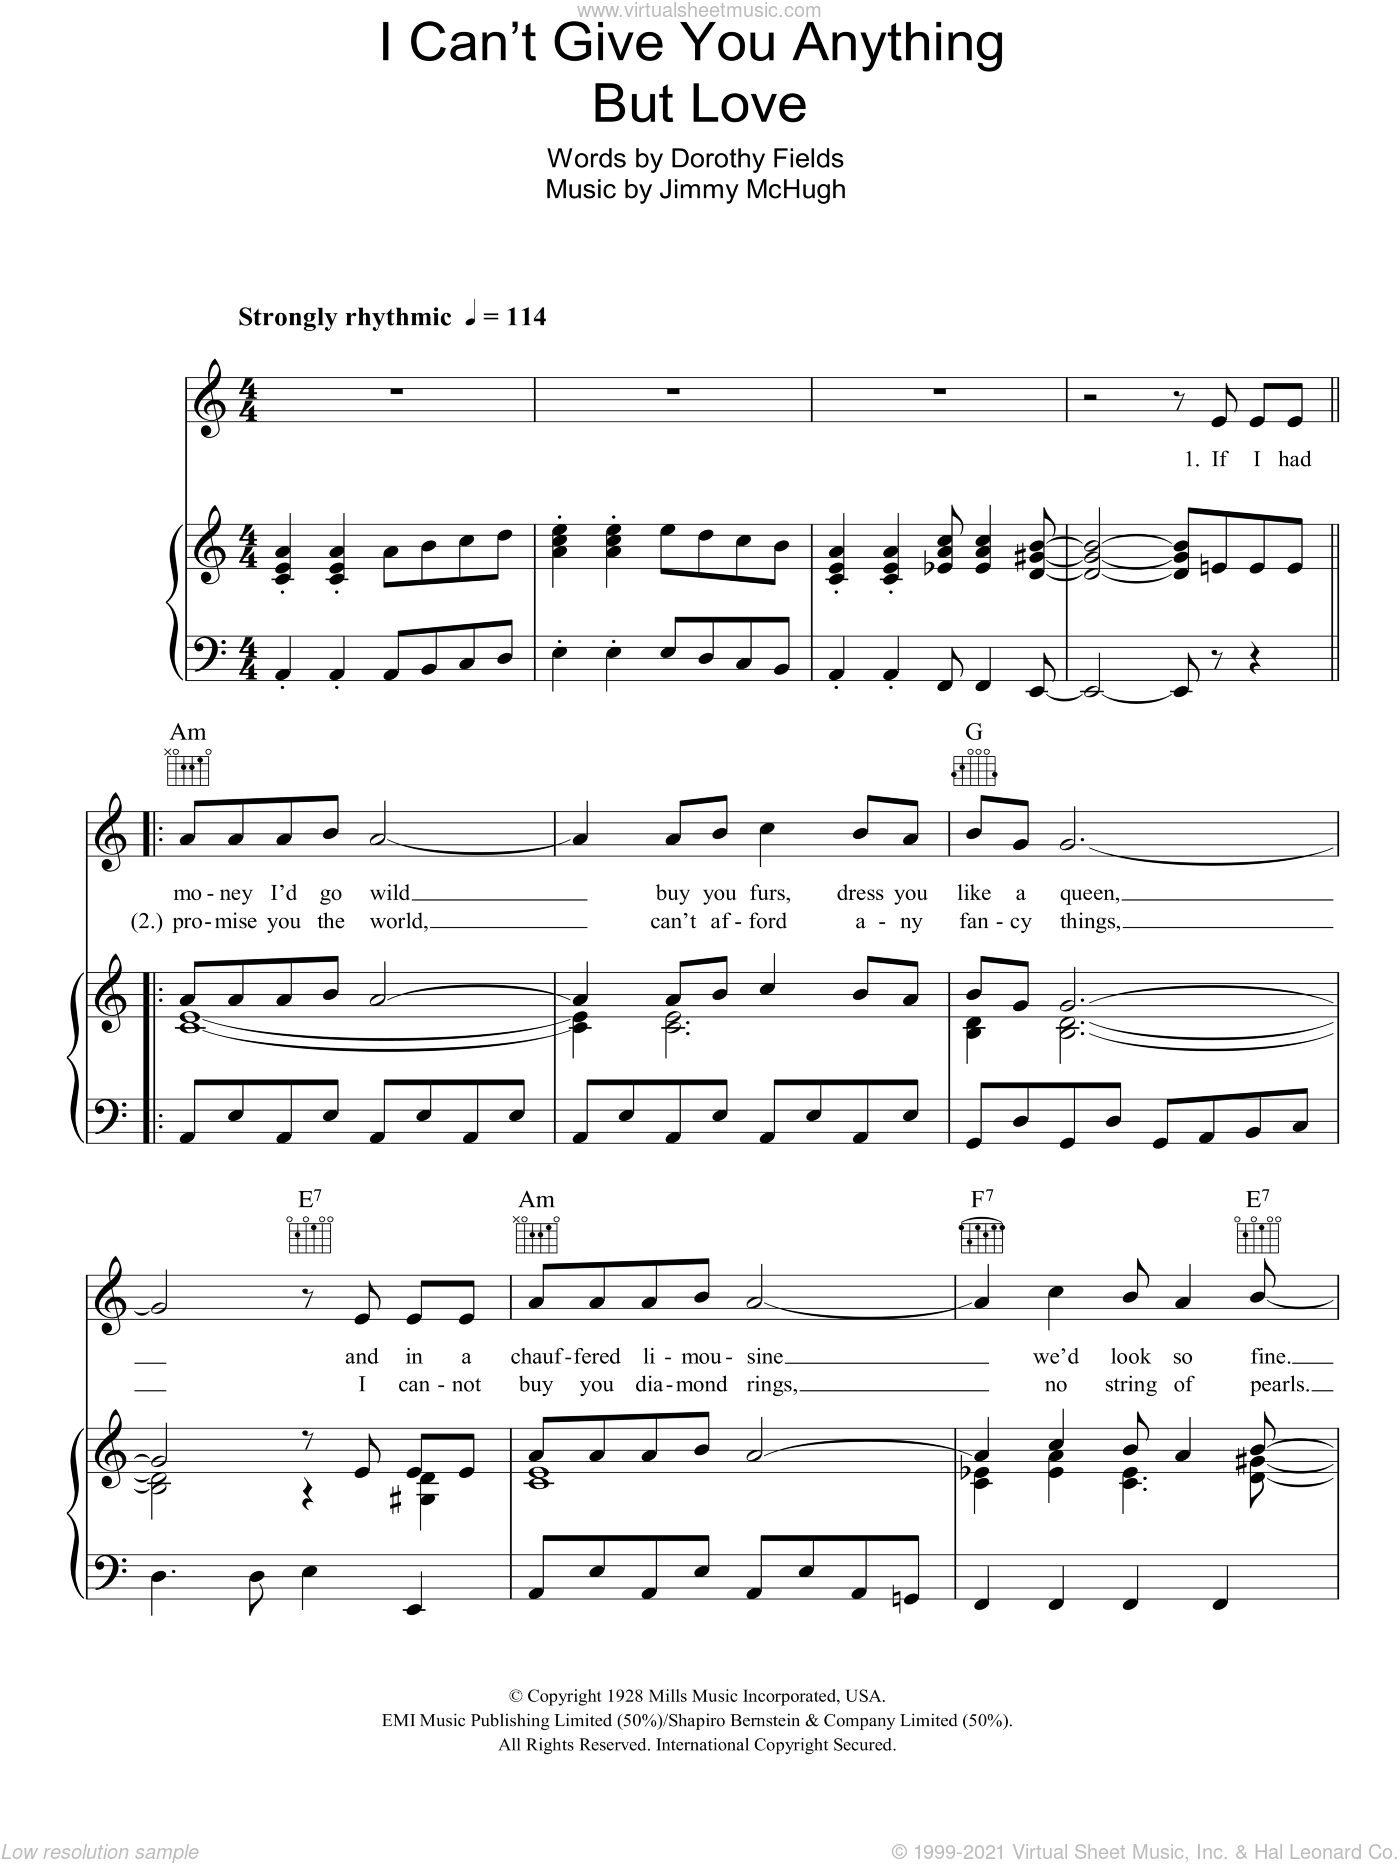 Stylistics I Can't Give You Anything But Love sheet music for voice, piano or guitar